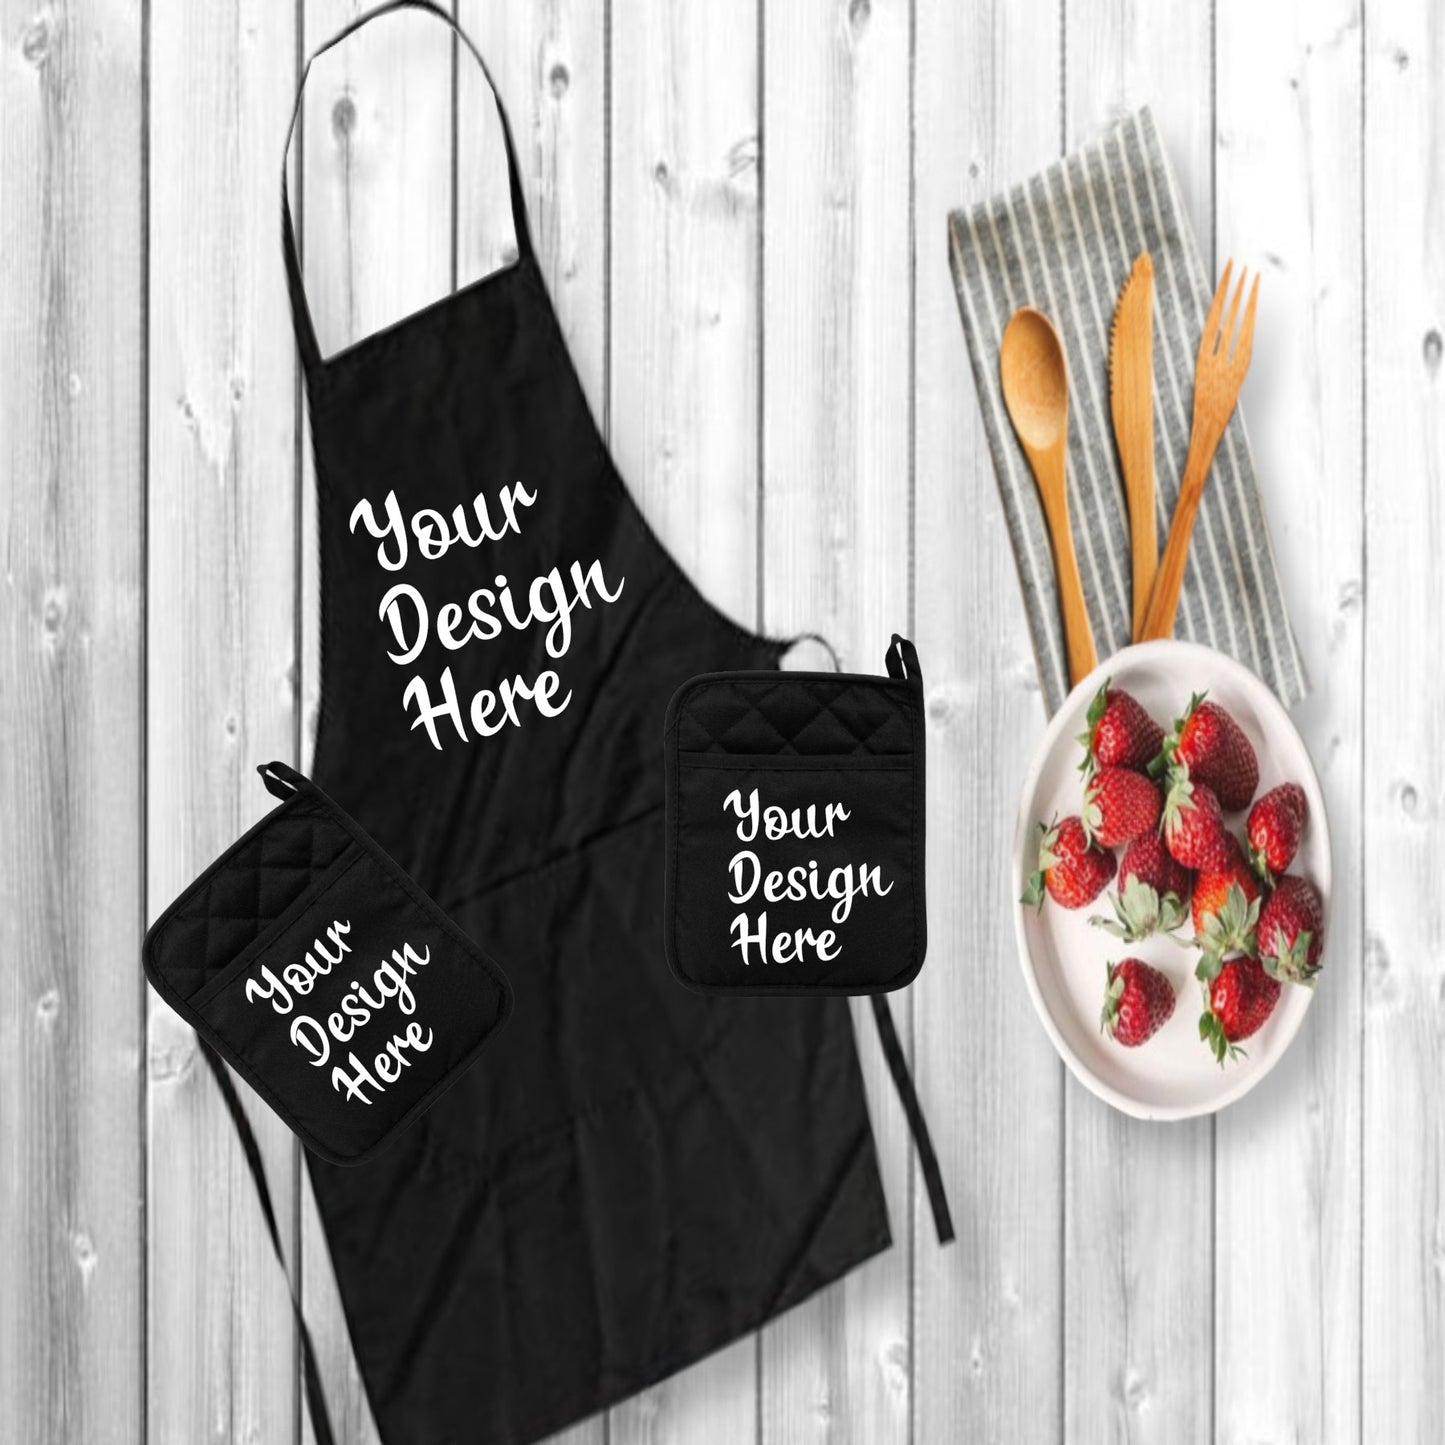 Polyester/Rubber Oven Mitts And Apron Designed your way